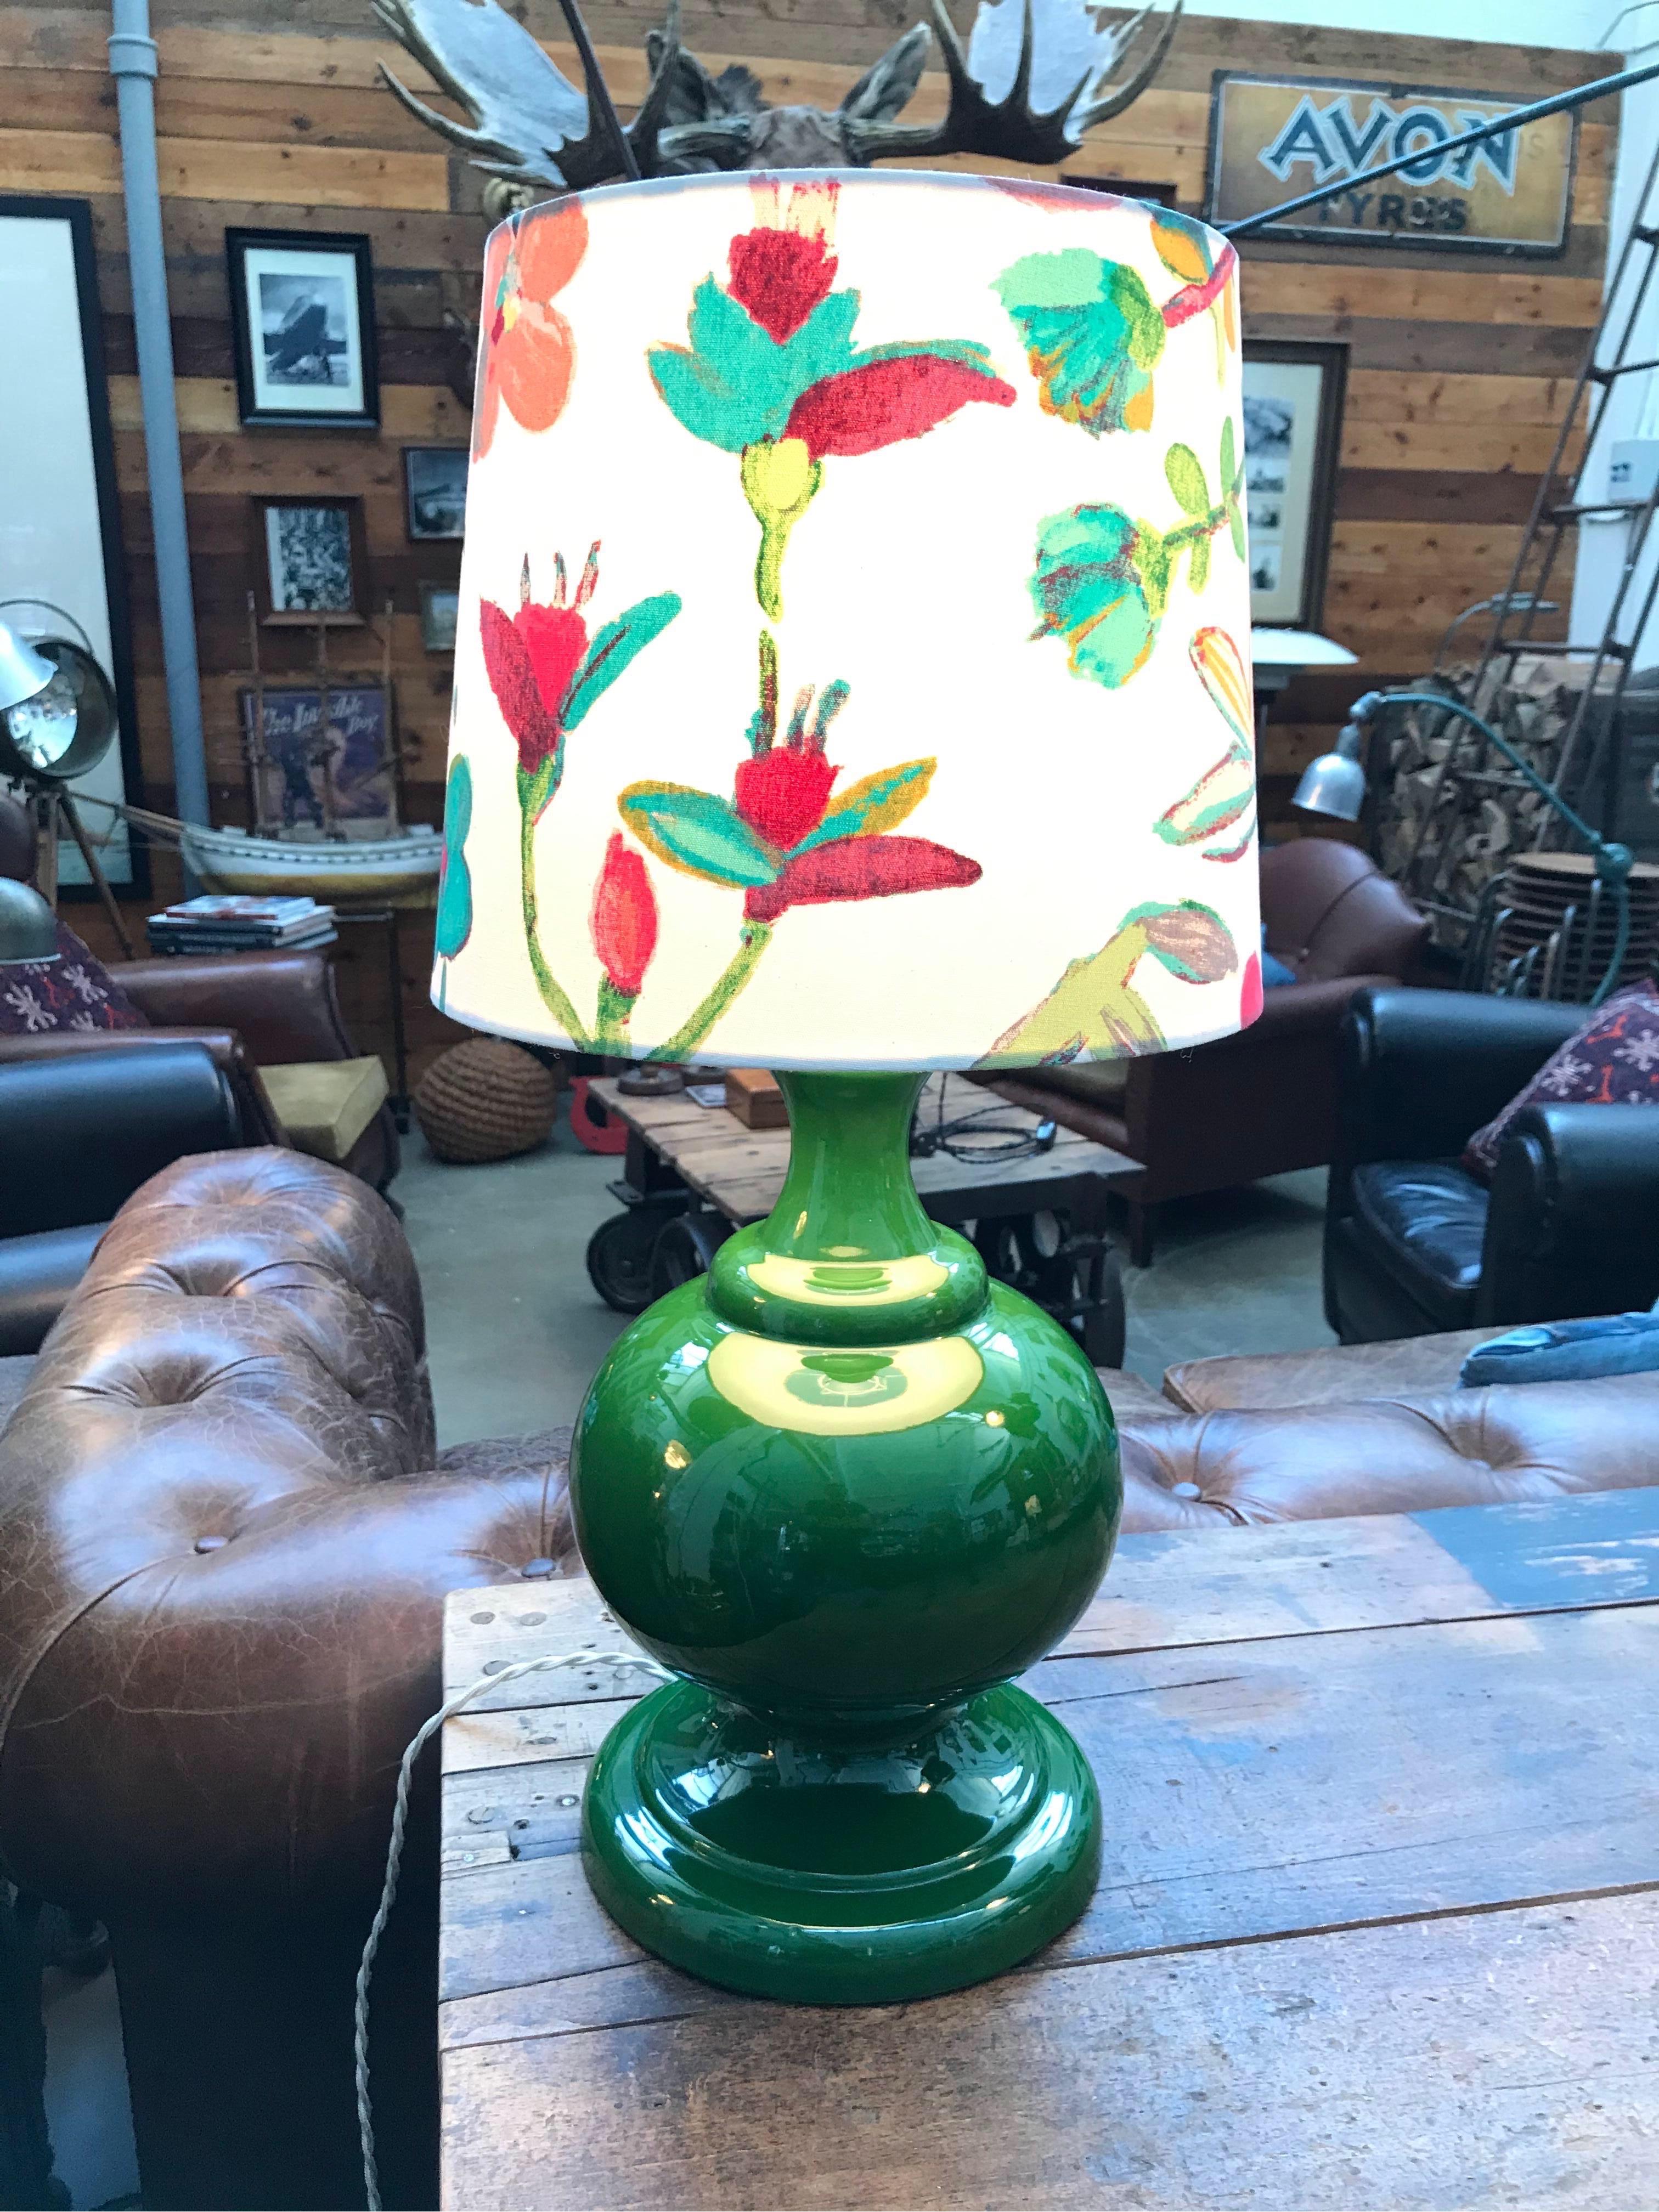 Vintage porcelain table lamp from the 1960s
This retro table lamp has great proportions and a striking color.
Rewired and ready to use.
Can be fitted with an EU or US plug.
A beautiful lamp from a great design period.
Shade not included.